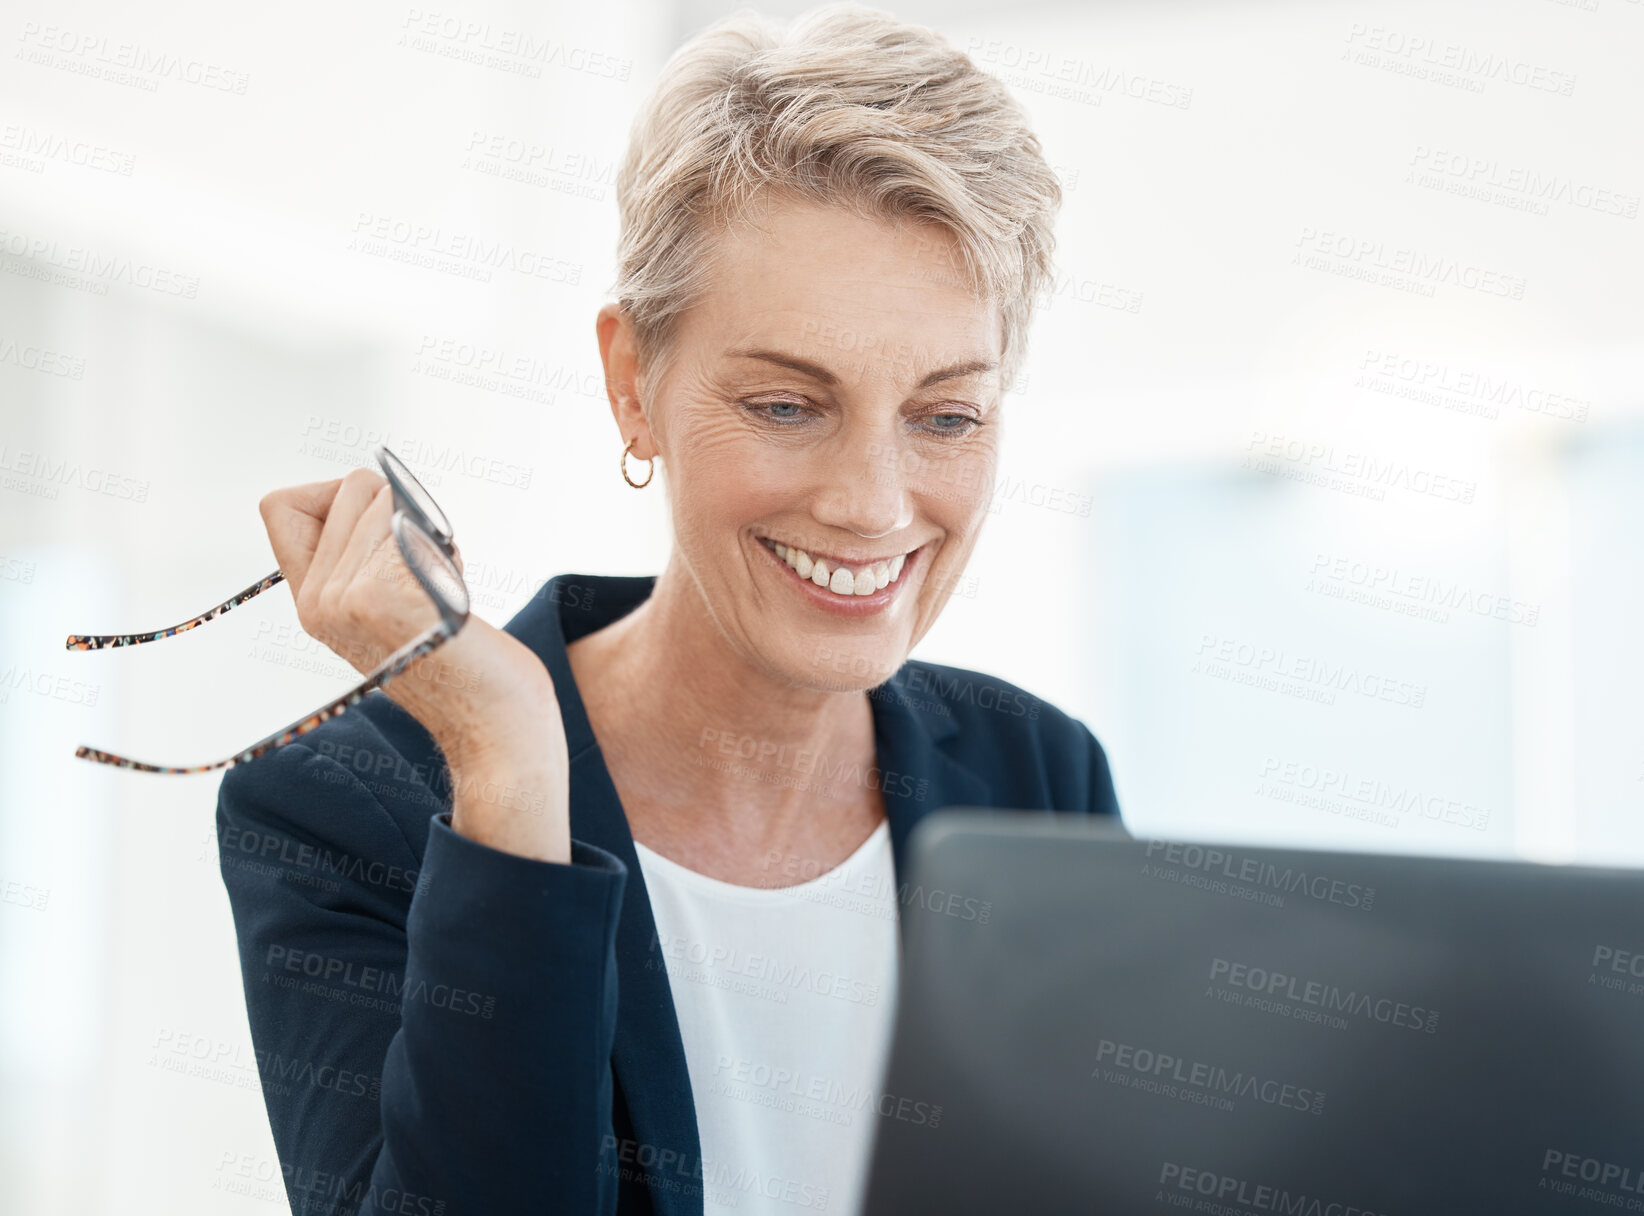 Buy stock photo Senior, executive and woman on laptop video call with client for friendly legal advice and talk. Mature lawyer lady with joyful smile online for professional communication holding glasses.

